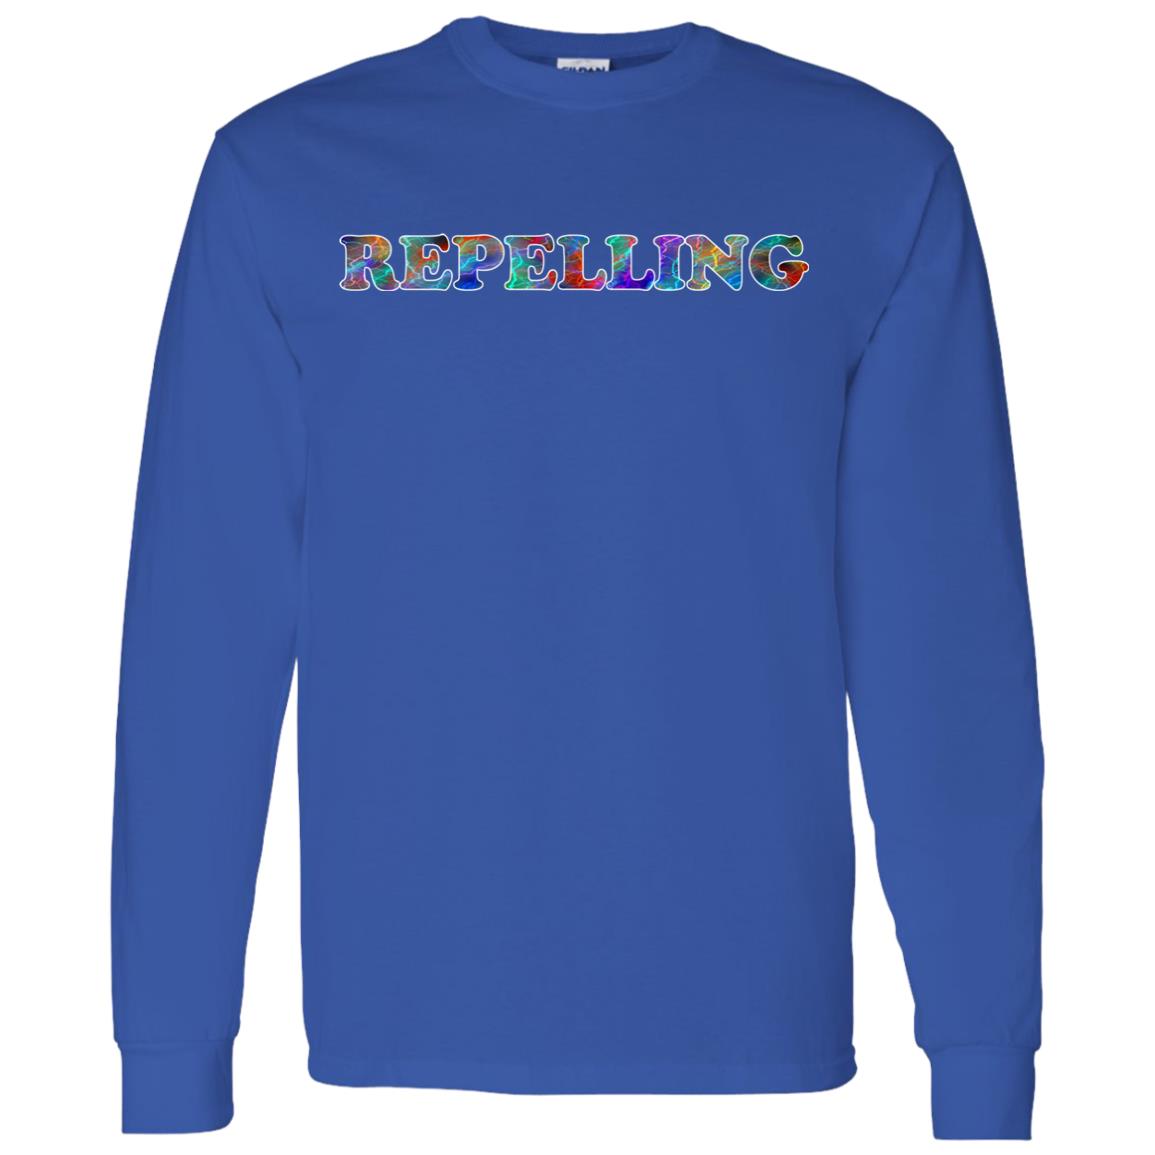 REPELLING SPORT LONG SLEEVE T-SHIRT